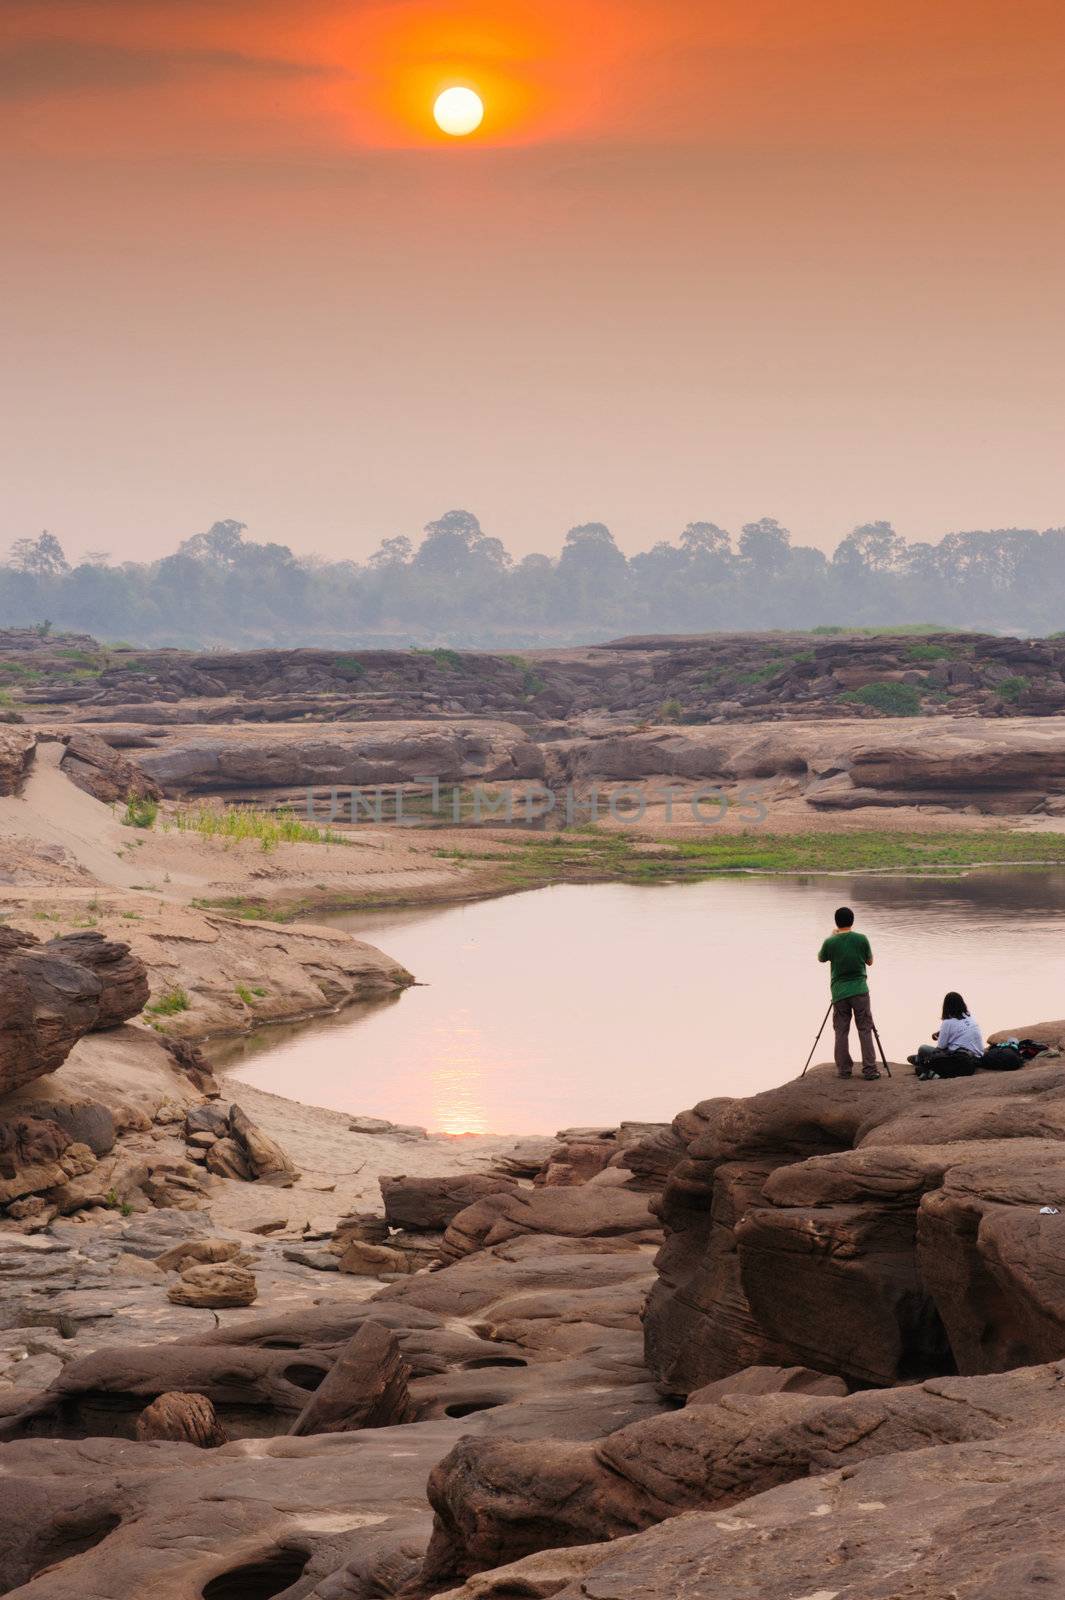 Sunrise on three thousand waving ,this is travel  look like Grand Canyon  in Ubon Ratchathani , Thailand.